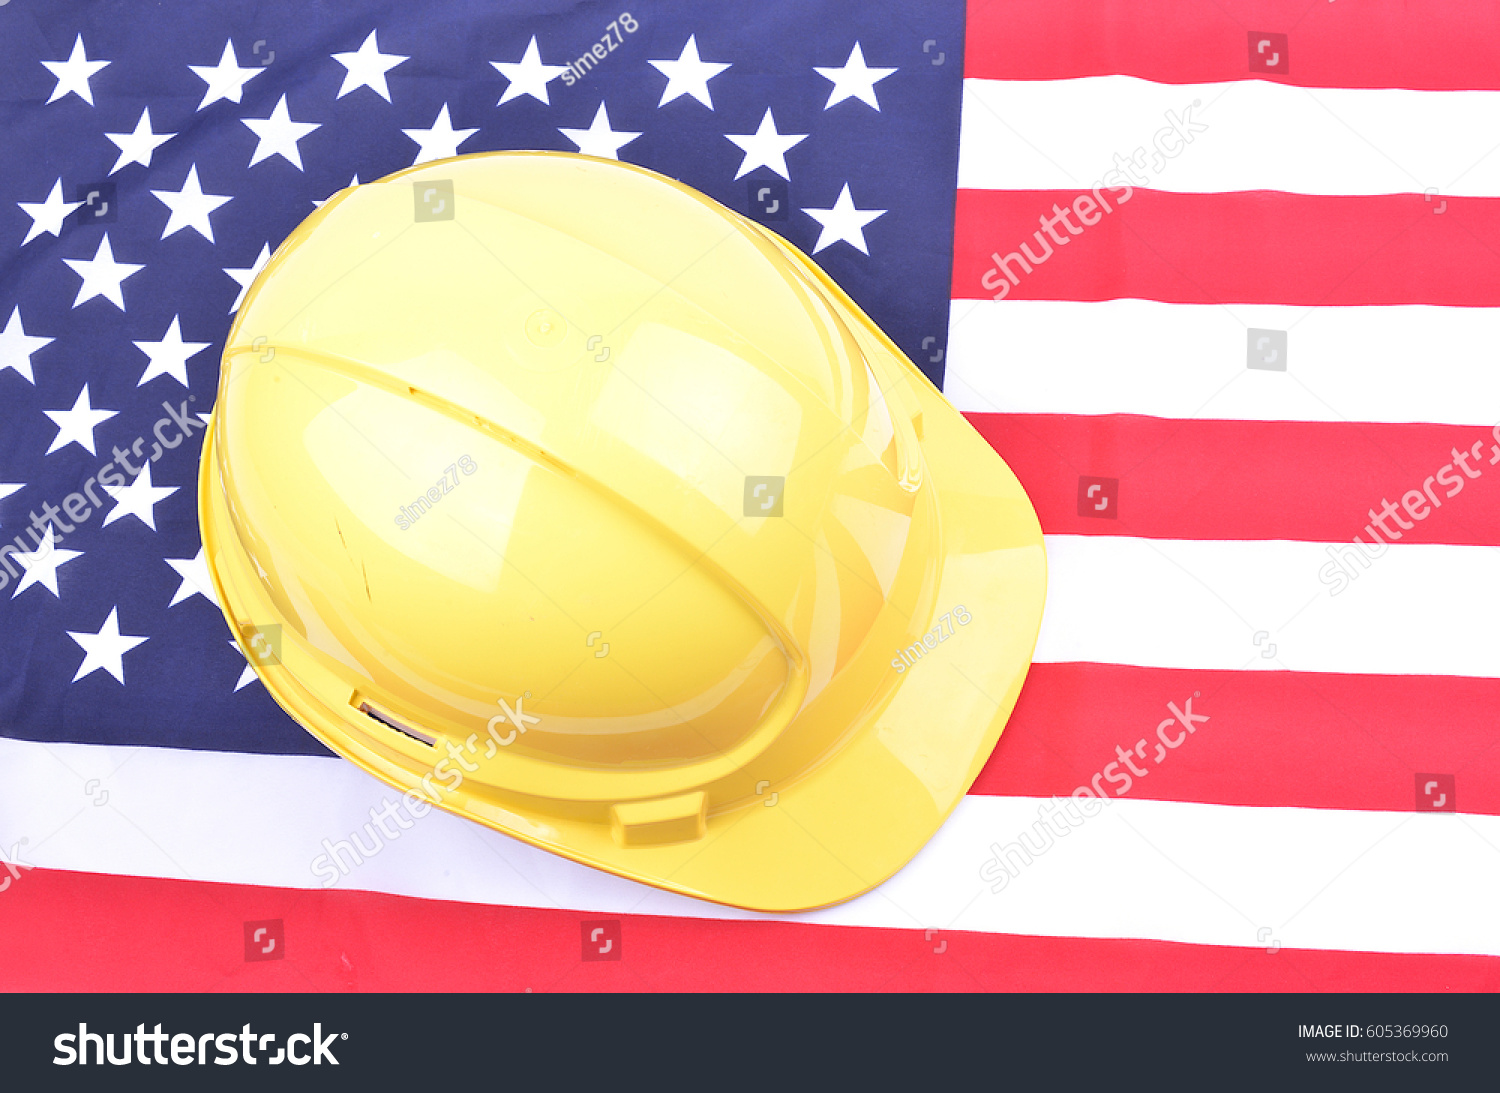 Workers rights in America with strong construction unions #605369960